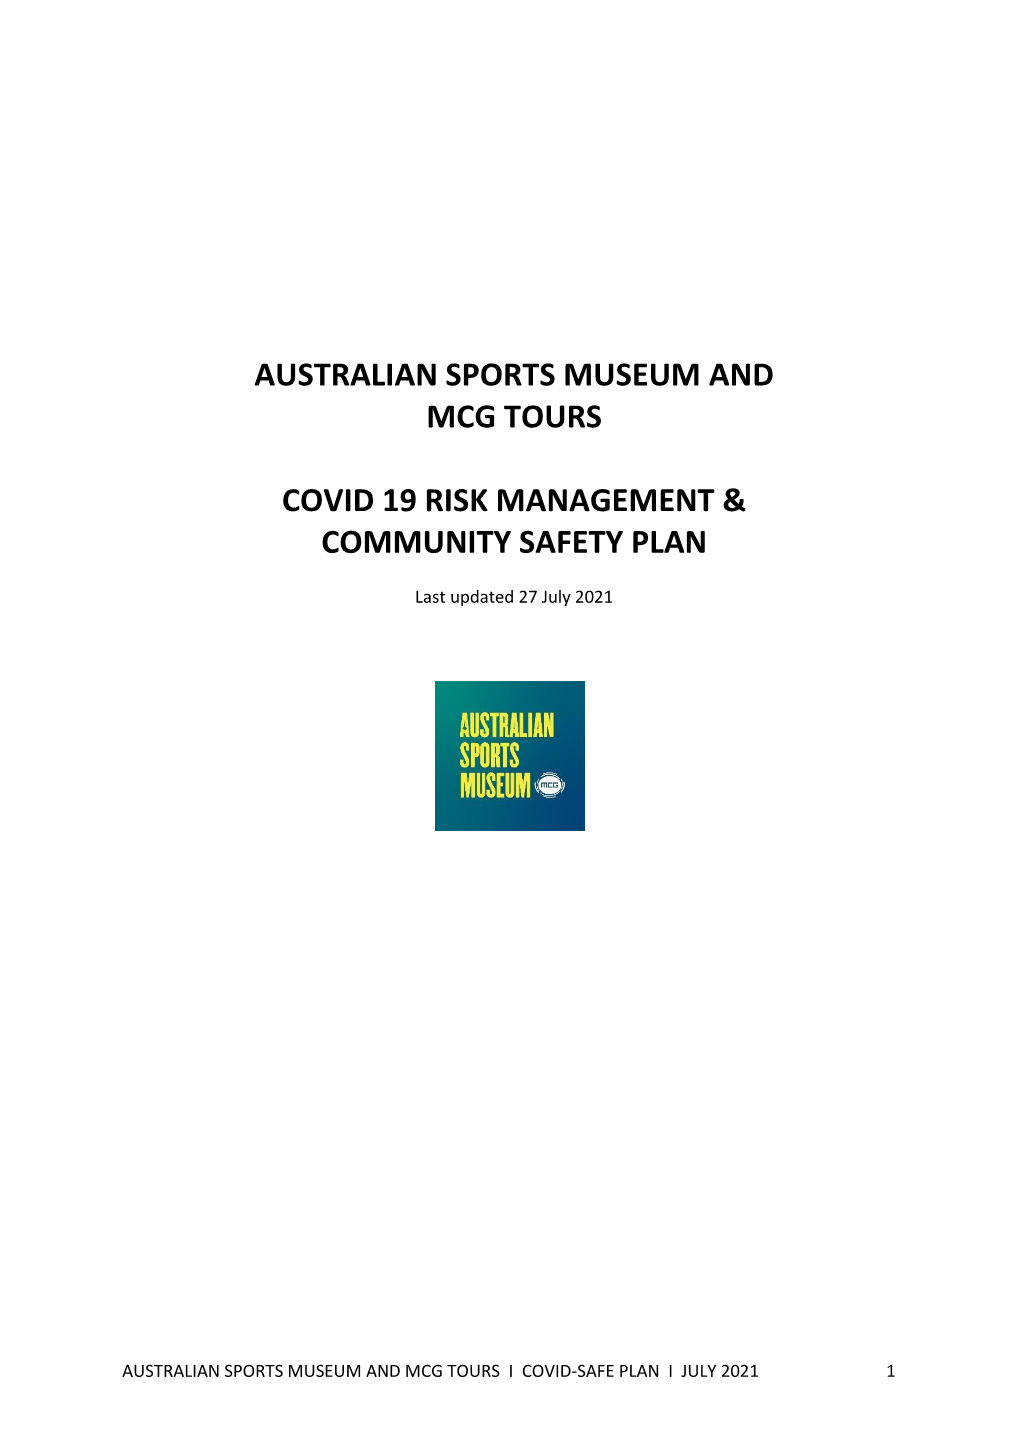 Australian Sports Museum and Mcg Tours Covid 19 Risk